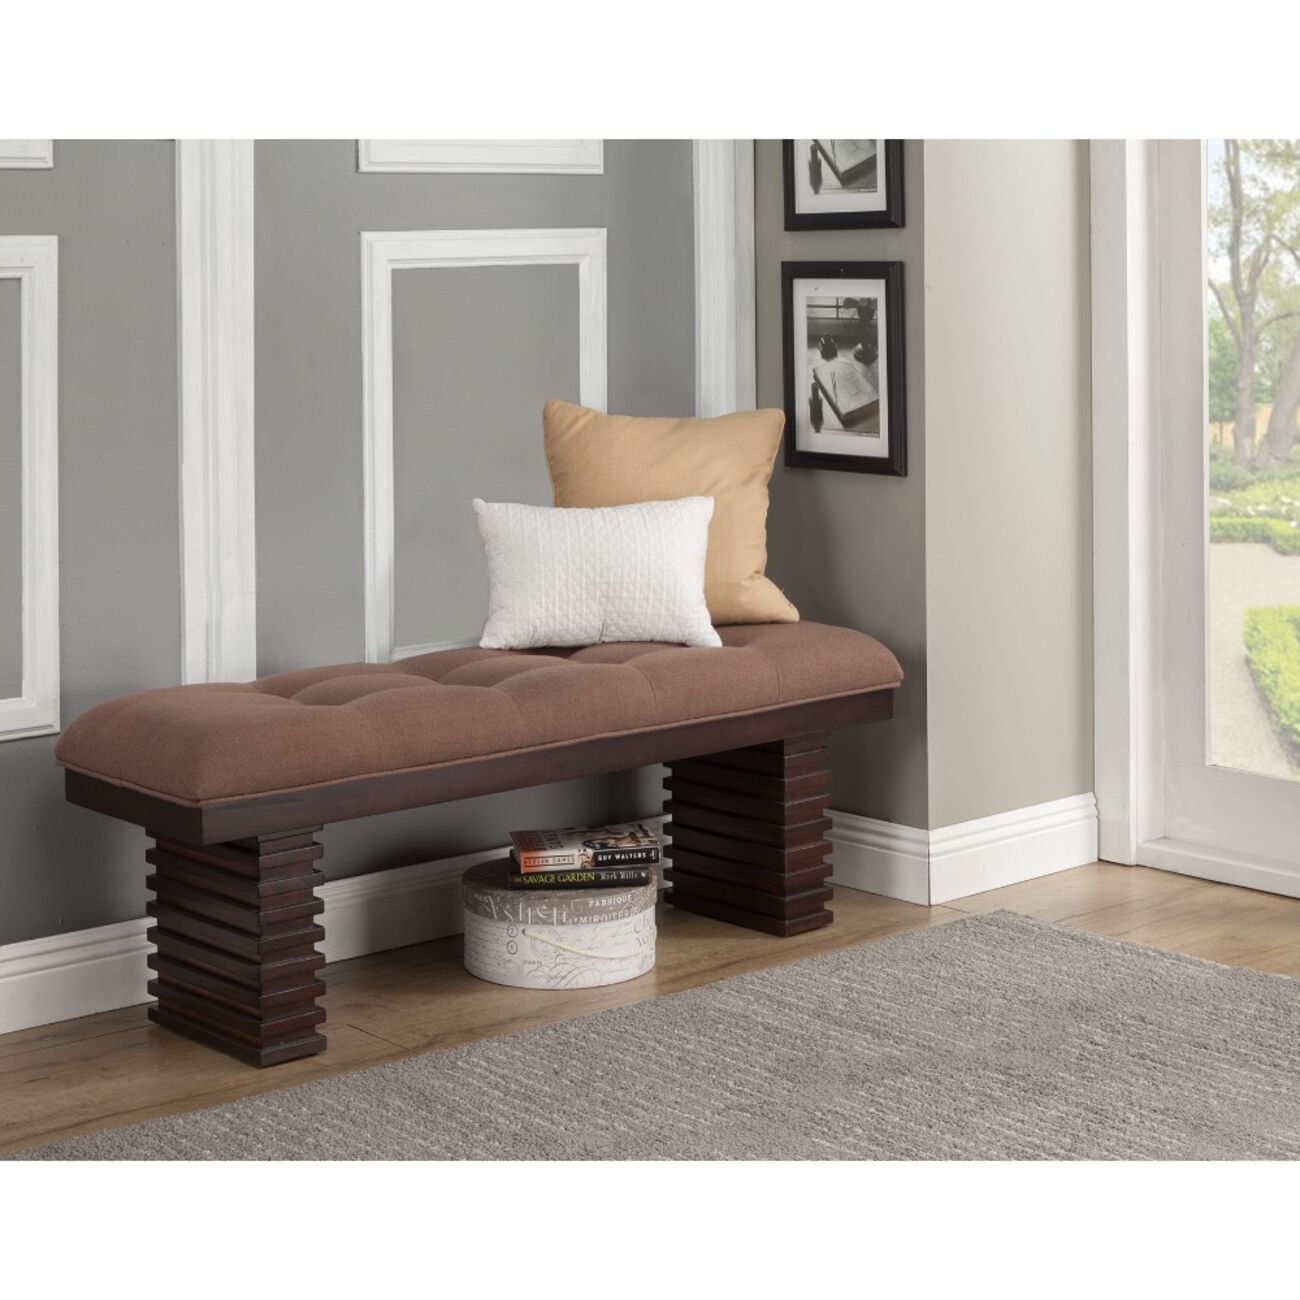 Wooden Dining Bench With Tufted Upholstery Brown